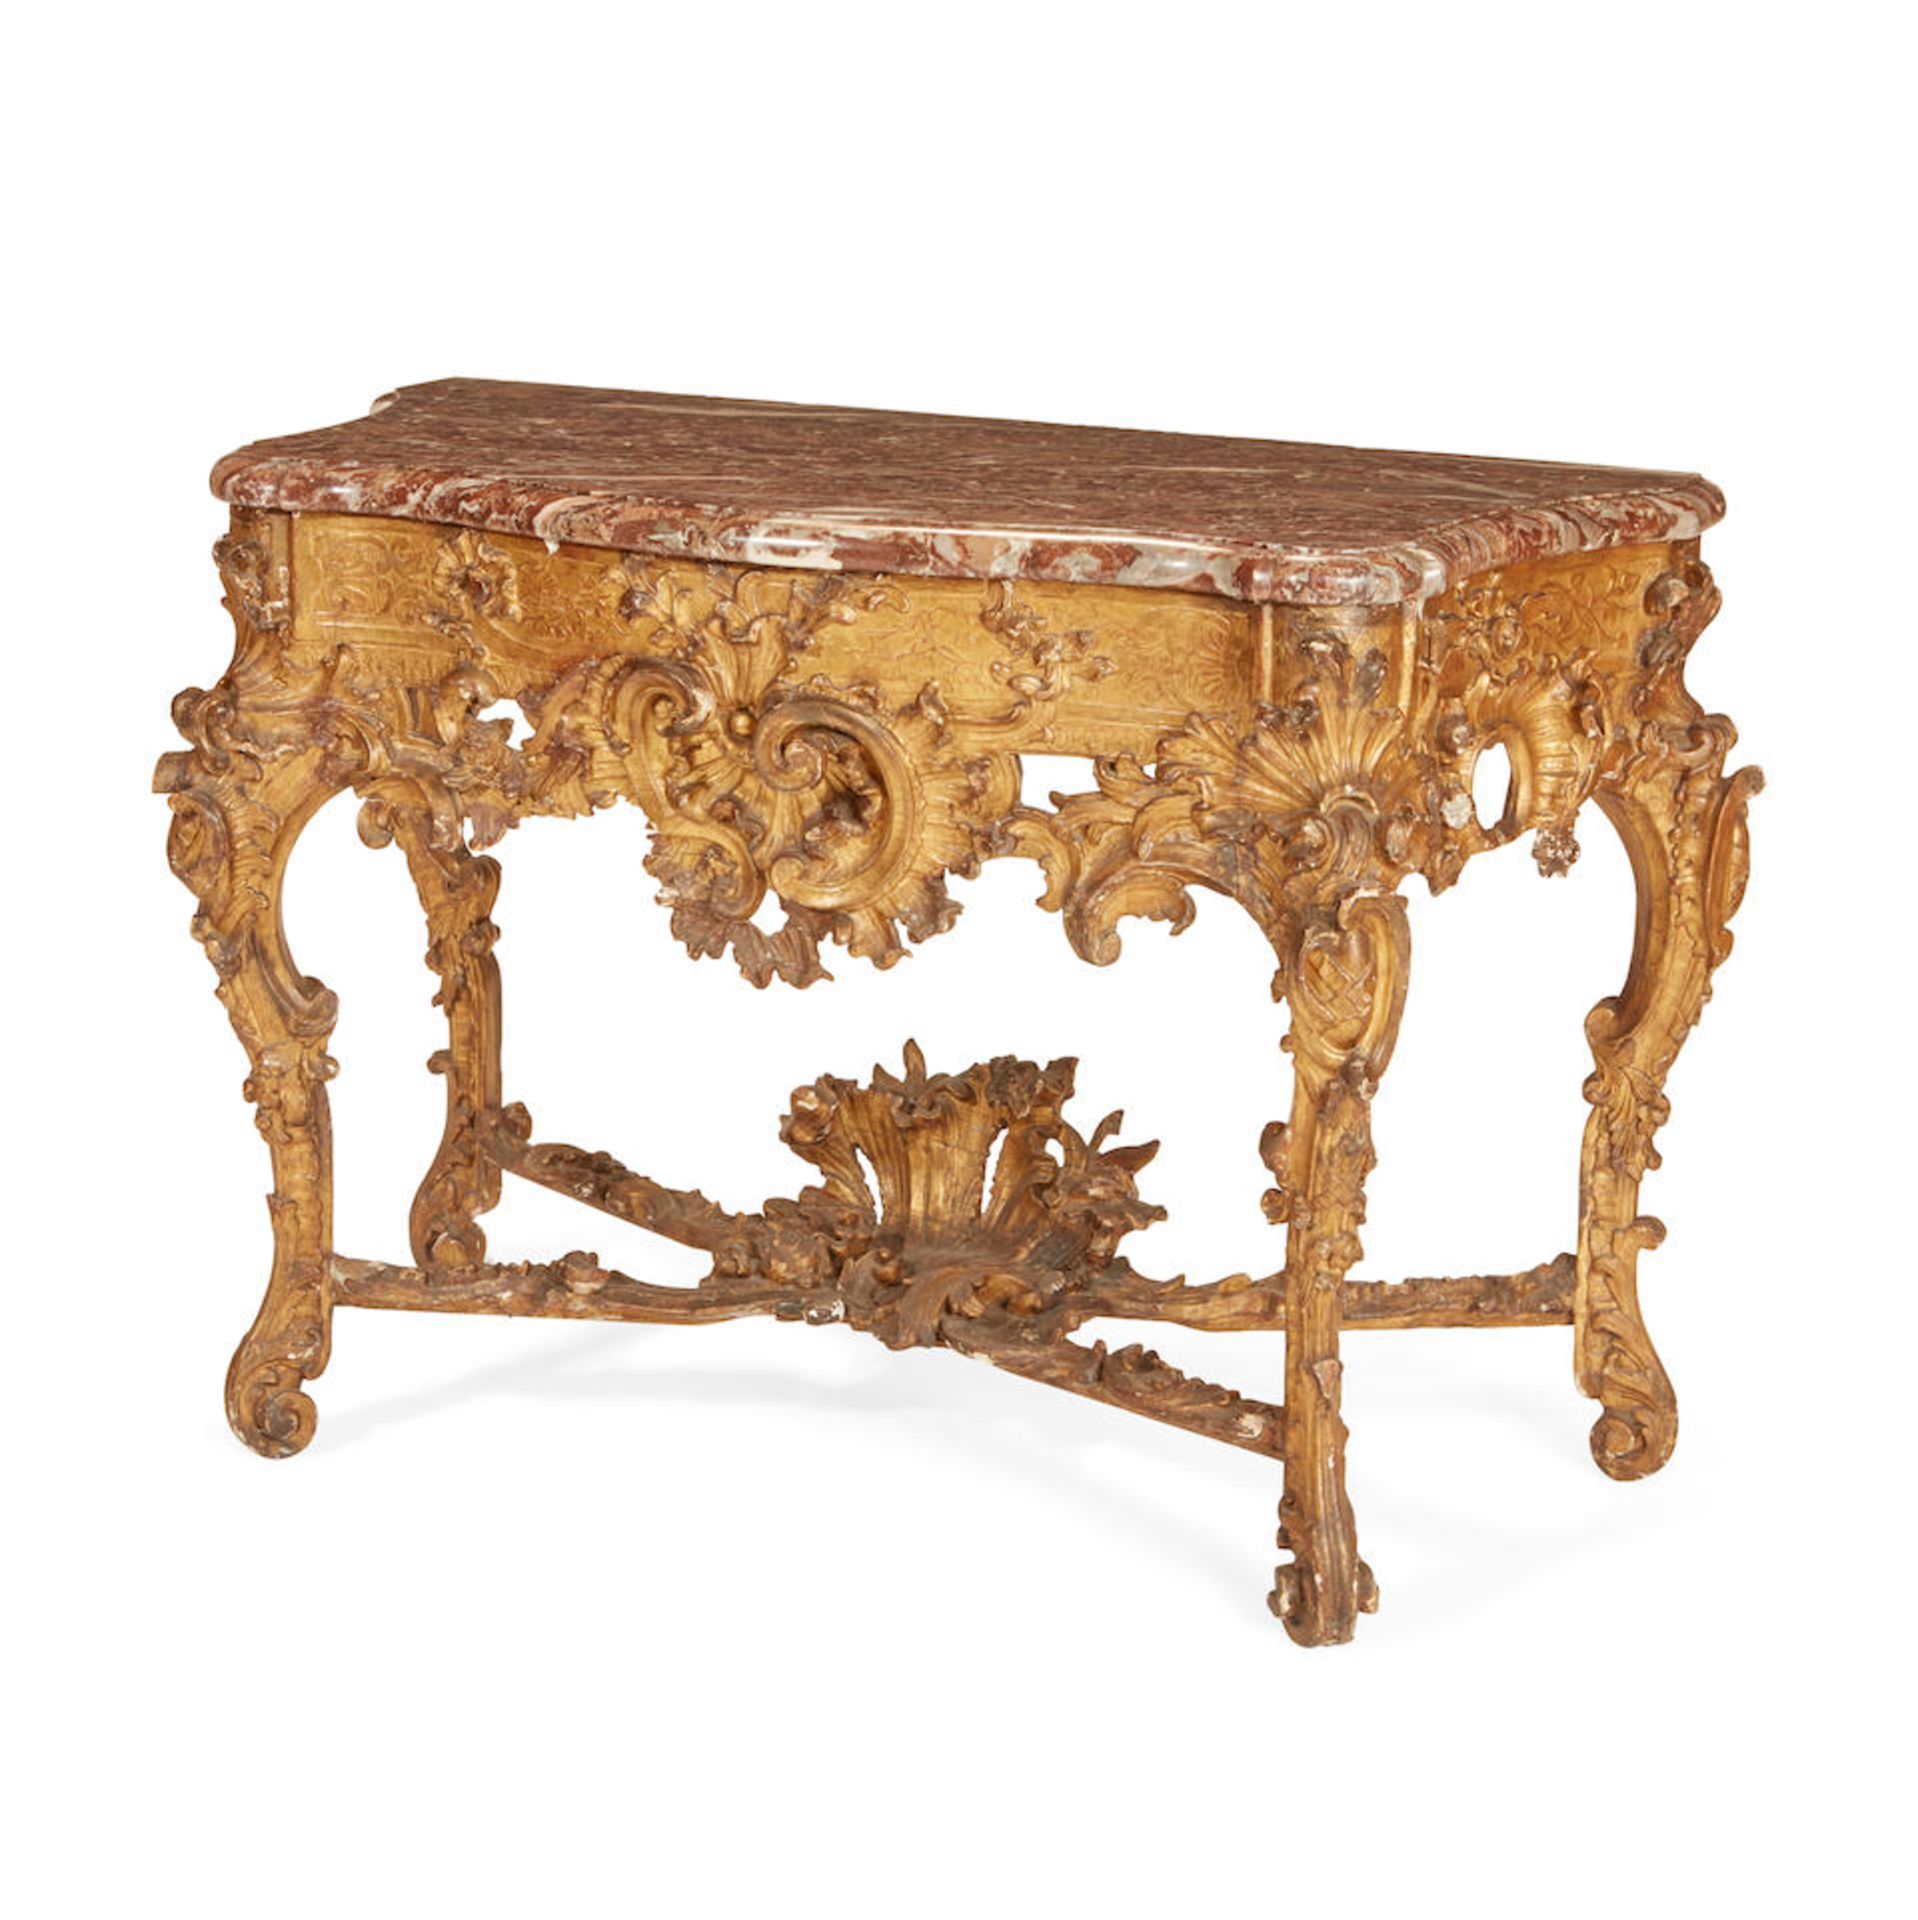 A GERMAN ROCOCO MARBLE TOP CARVED GILTWOOD CONSOLE TABLEMid-18th century